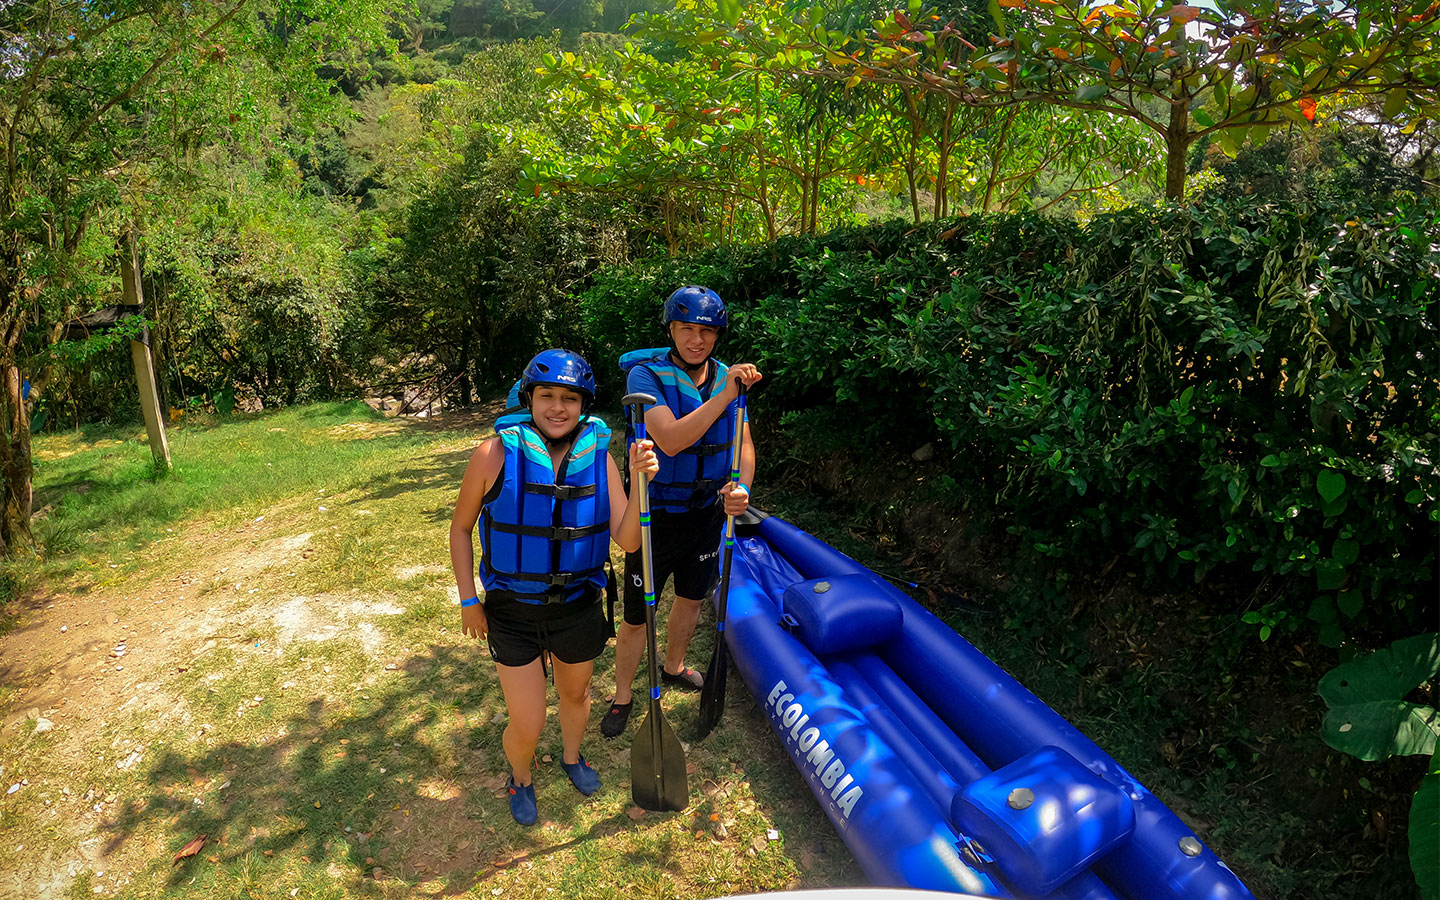 Rafting-Doky-Rio-Fonce